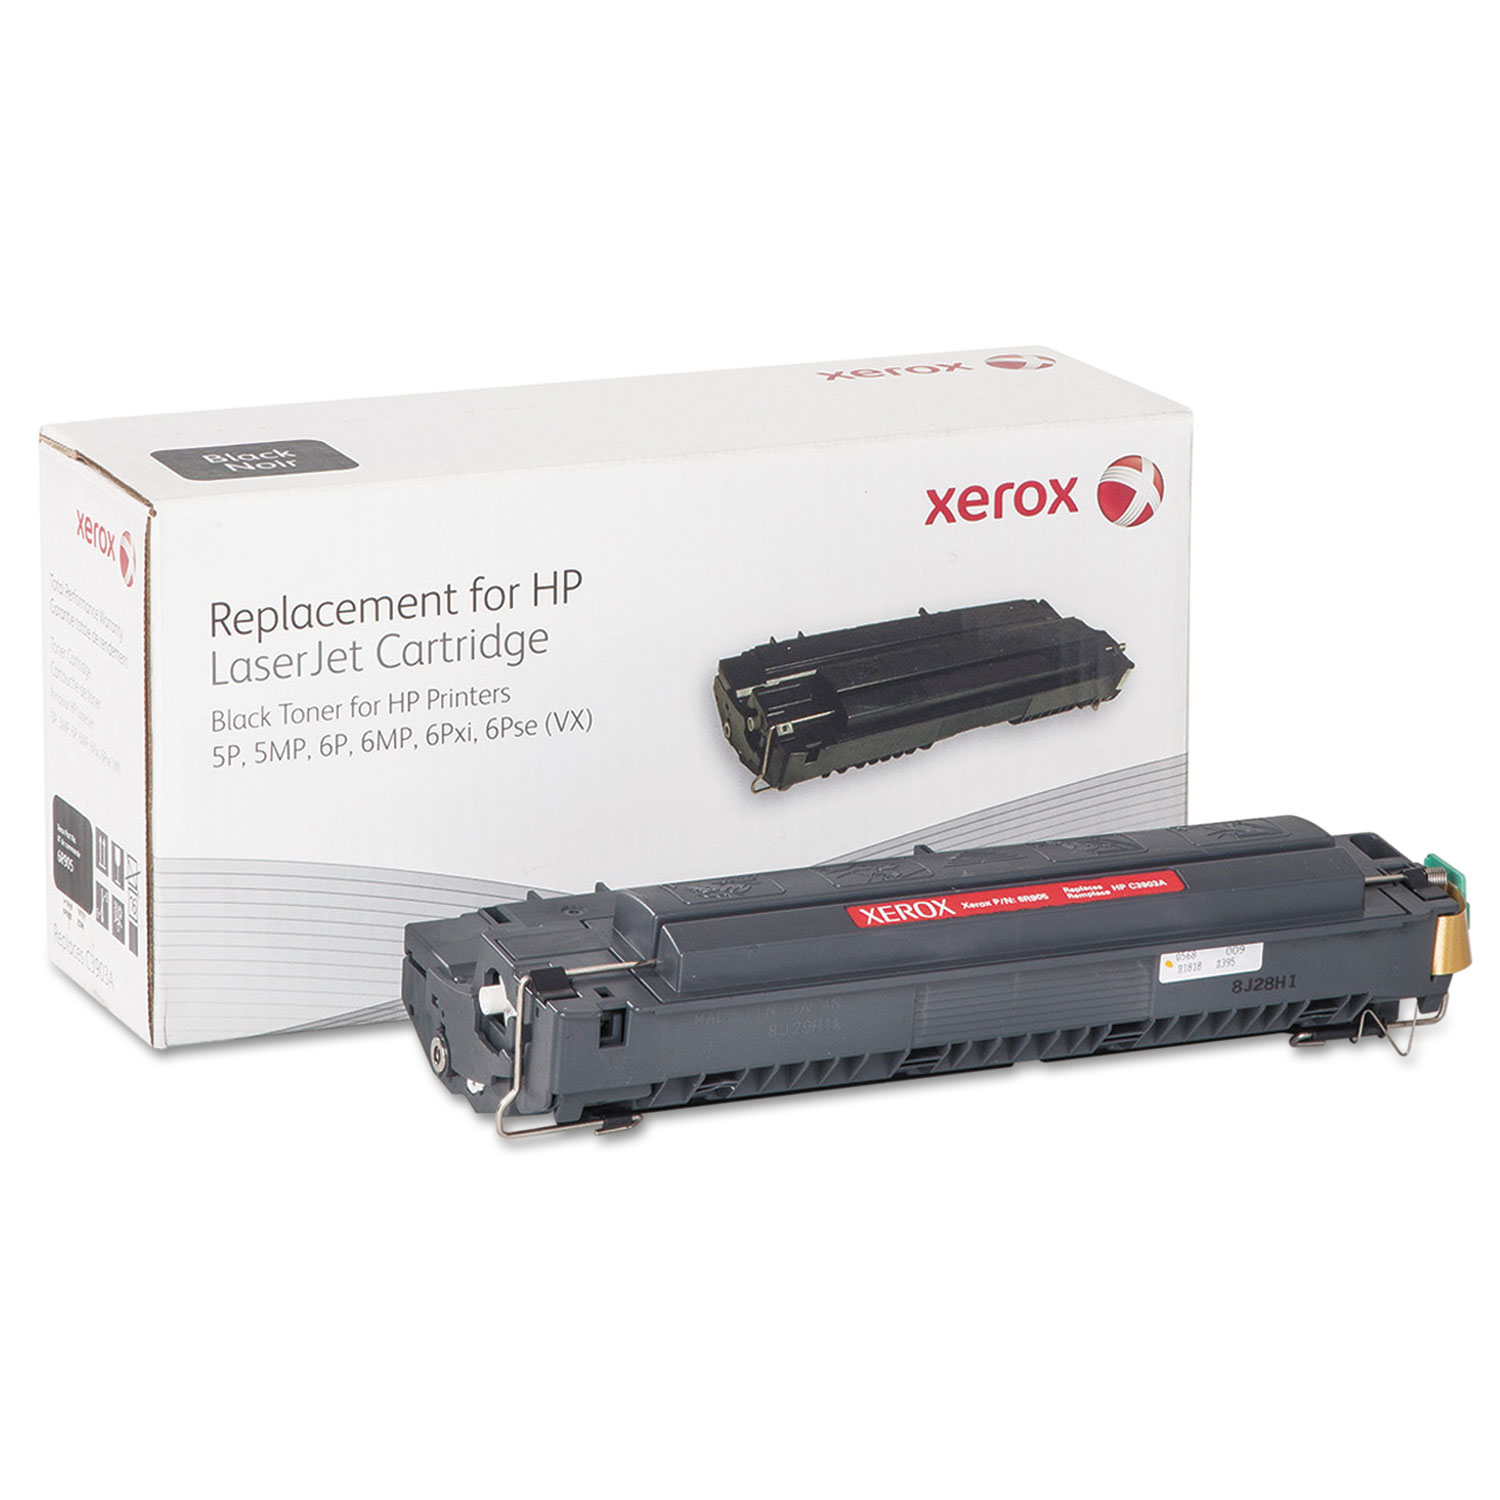  Xerox 006R00905 006R00905 Replacement Toner for C3903A (03A), Black (XER006R00905) 